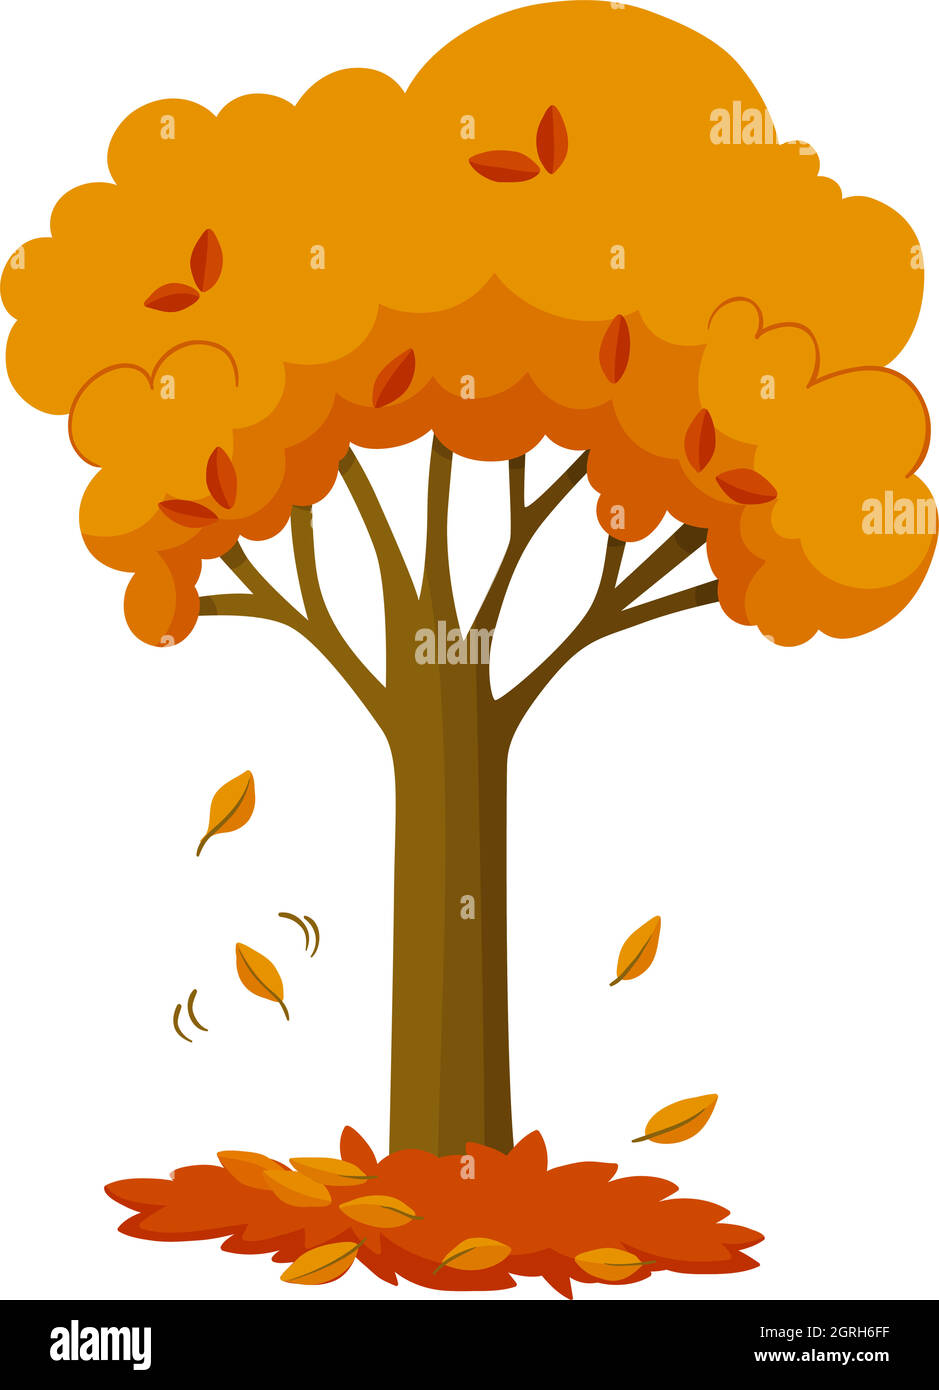 Dry leaves falling off the tree Stock Vector